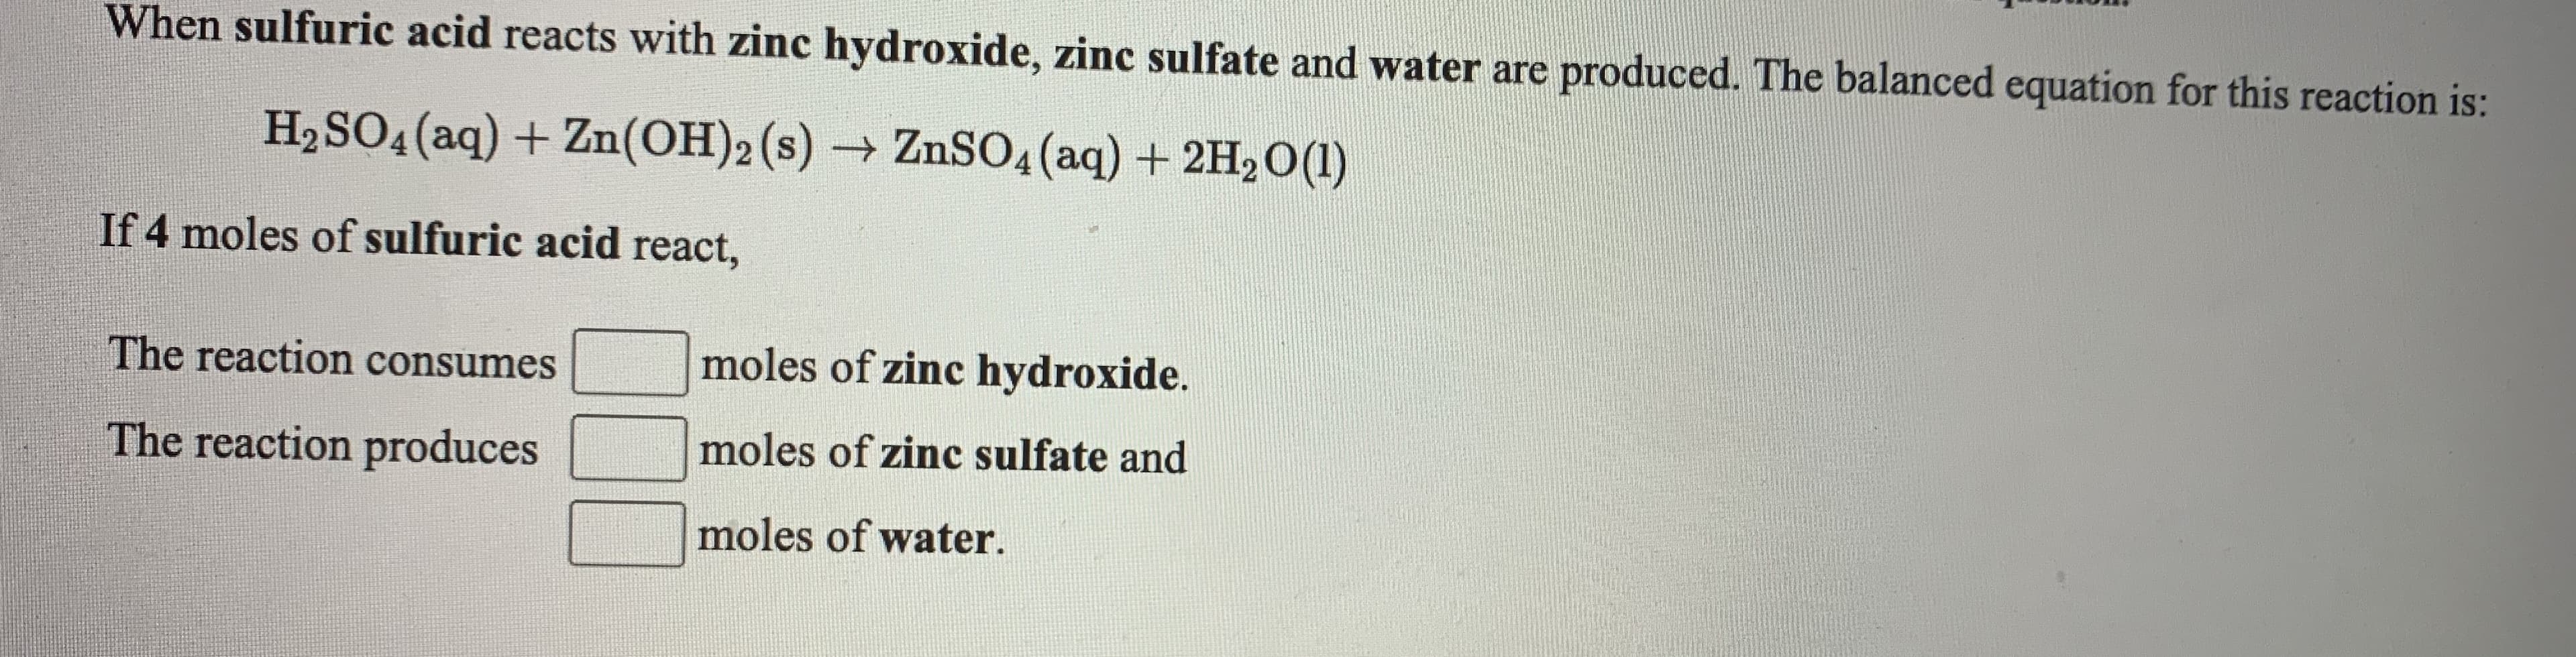 When sulfuric acid reacts with zinc hydroxide, zinc sulfate and water are produced. The balanced equation for this reaction is:
H2 SO4 (aq) + Zn(OH)2(s) → ZnSO4 (aq) + 2H2O(1)
If 4 moles of sulfurio
